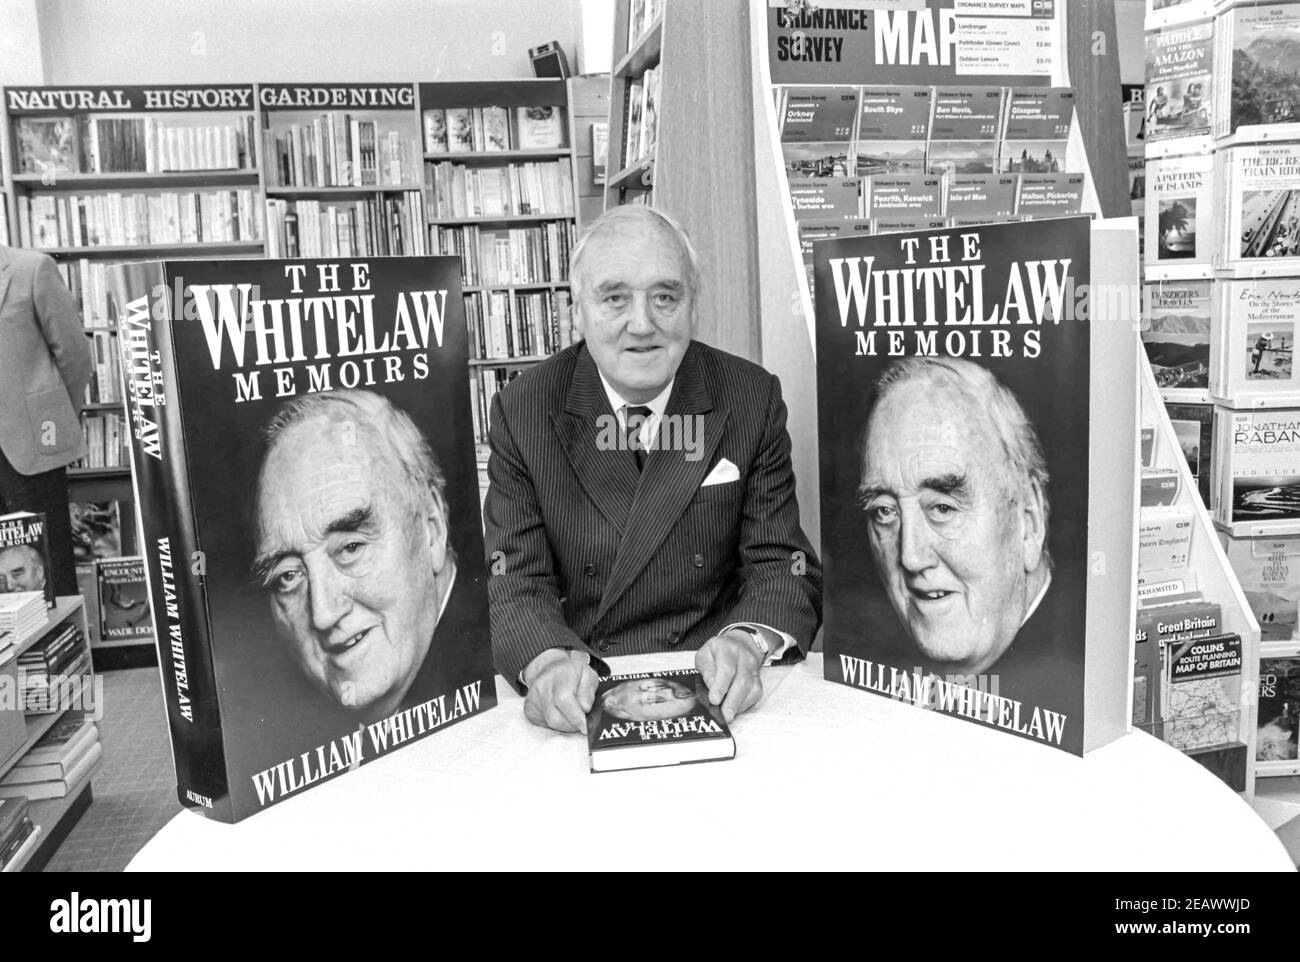 HEMEL HEMPSTEAD - ENGLAND. Willie Whitelaw at his book launch ’The Whitelaw Memories’ at WH Smiths in Hemel Hempstead, Hertfordshire, England in1989. Stock Photo